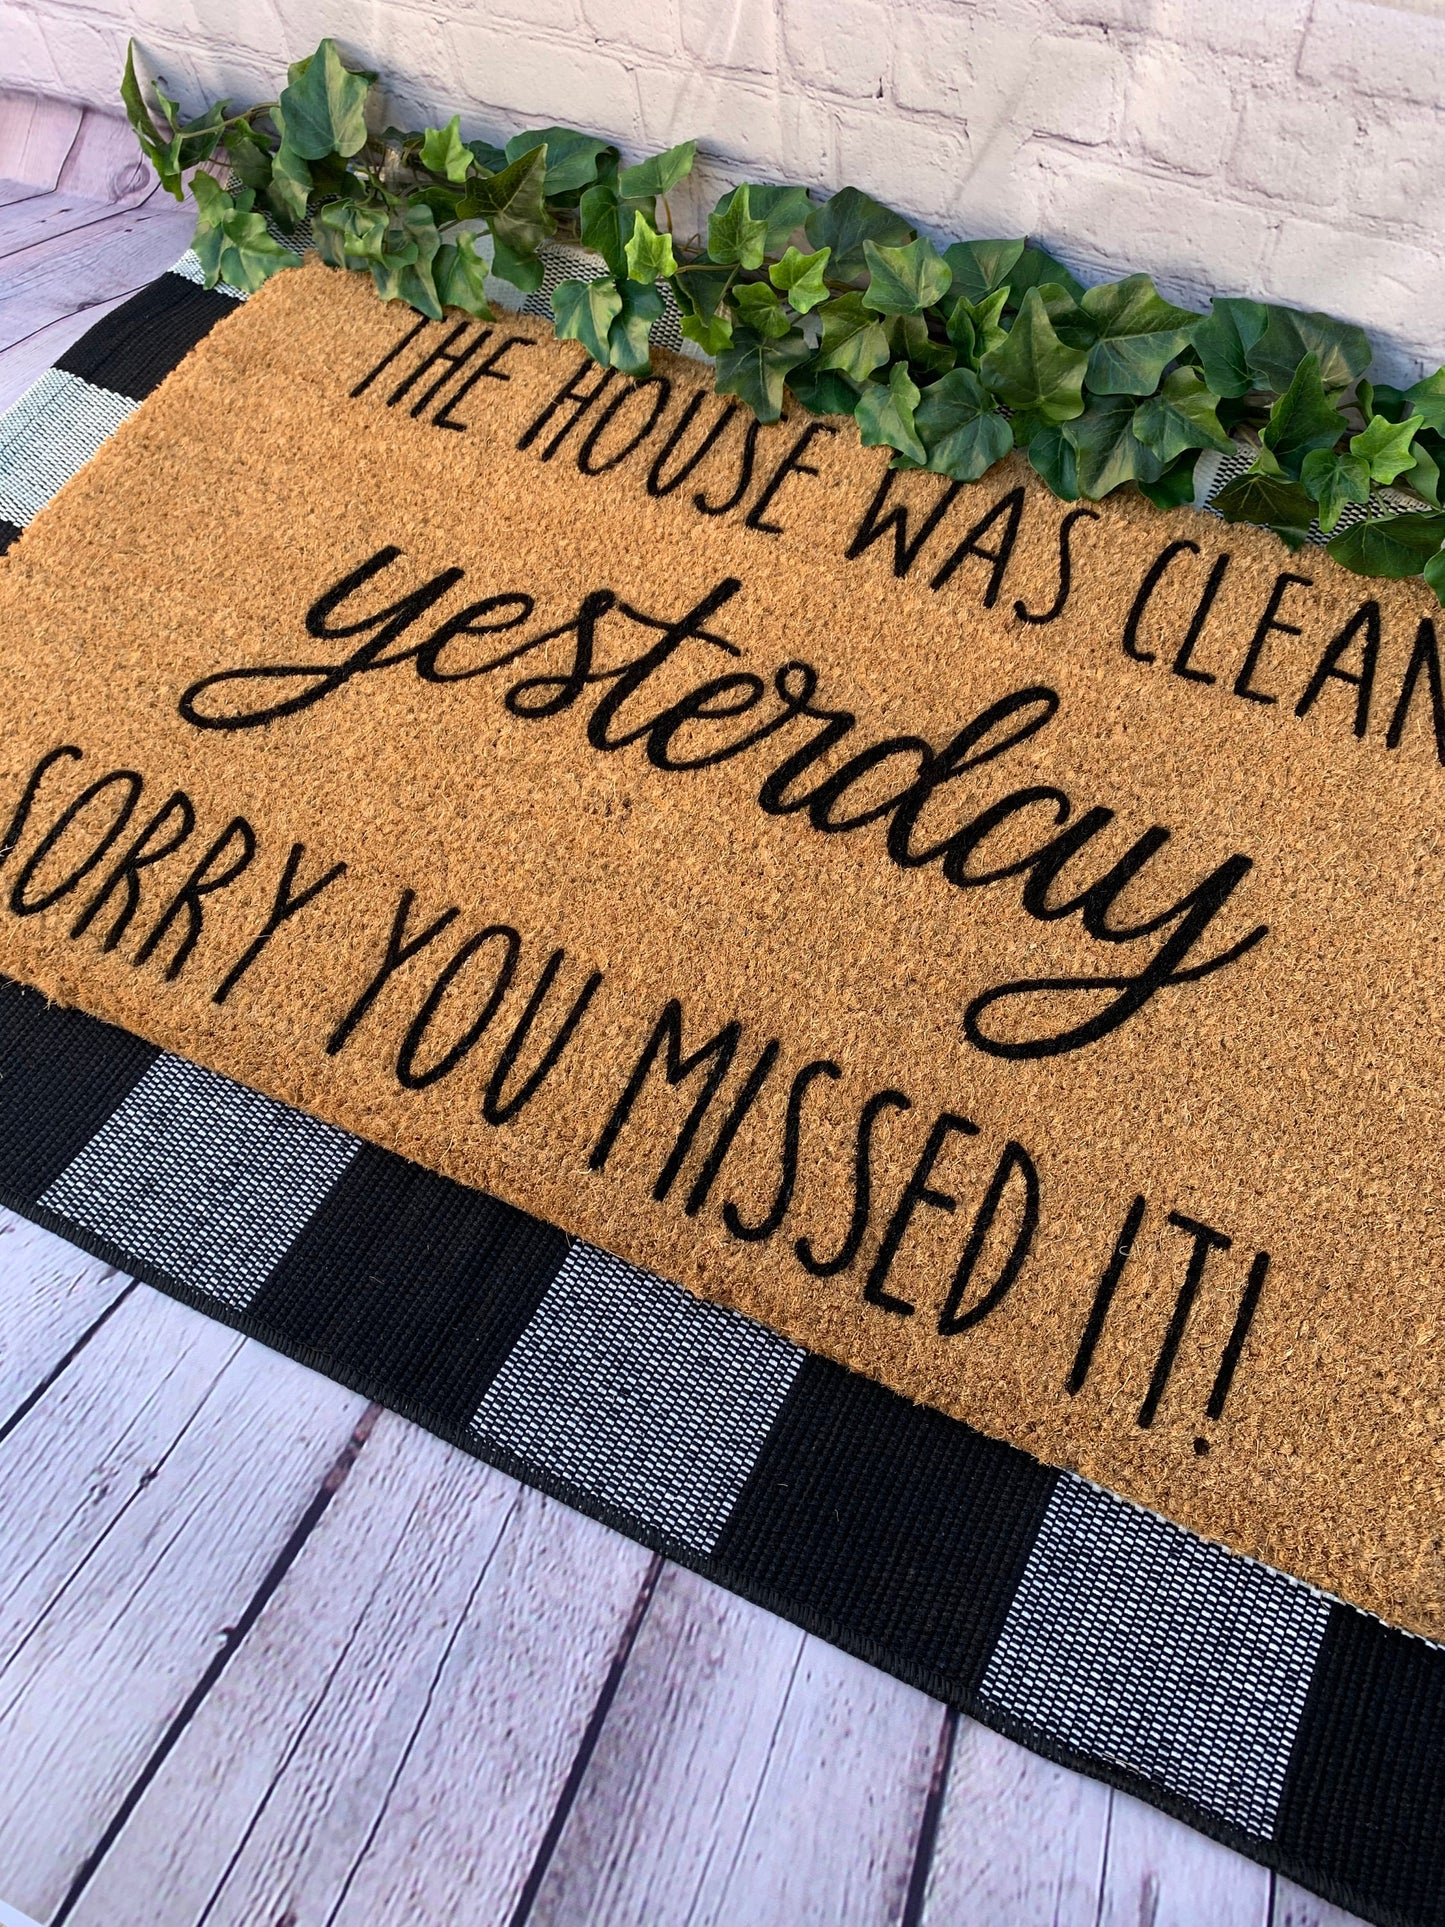 The House Was Clean Yesterday, Sorry You Missed It! | Funny Doormat